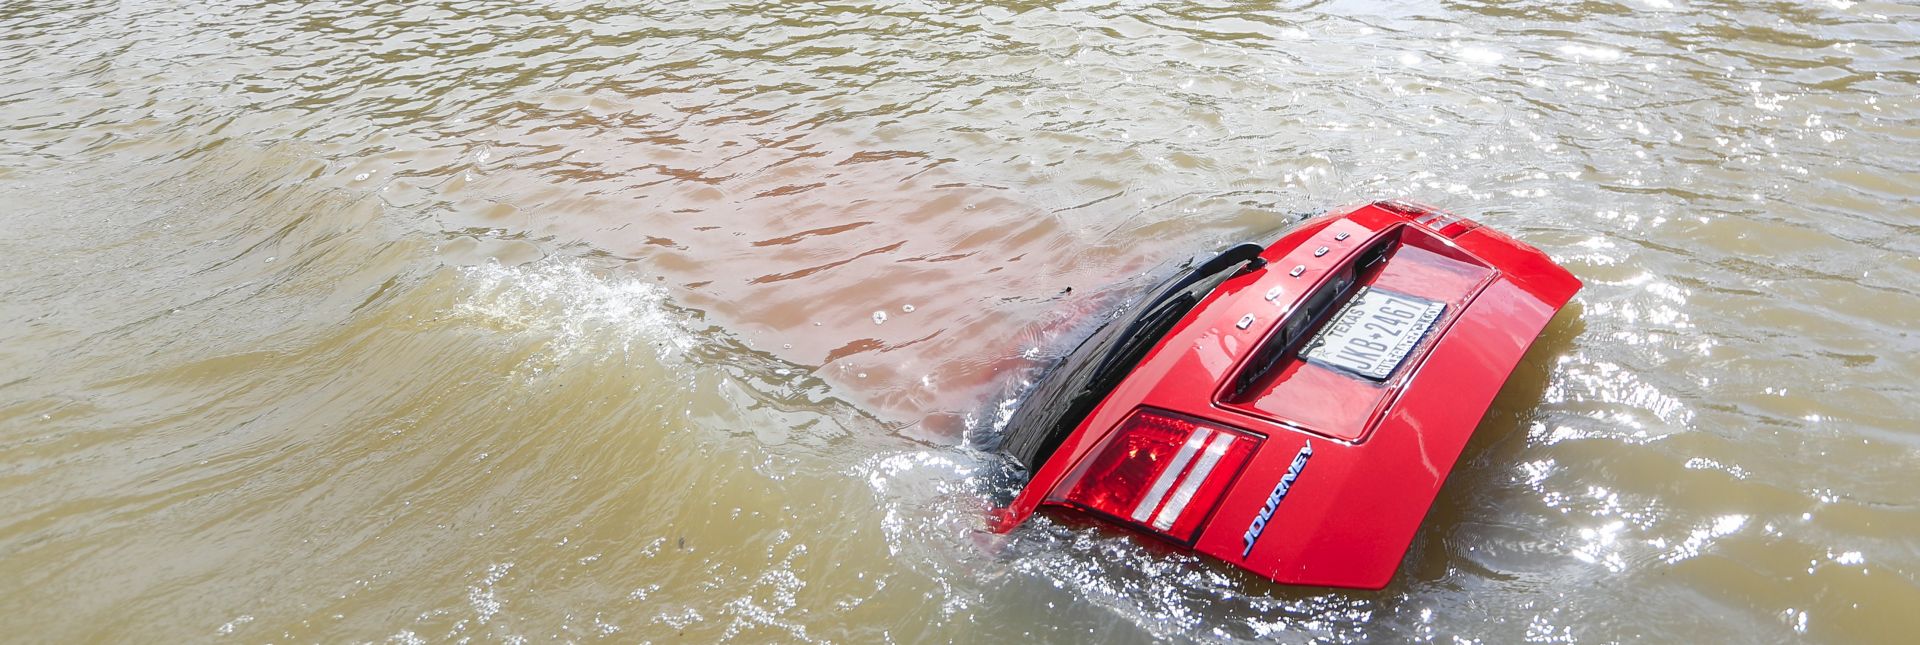 epa06172394 An automobile sits submerged in rising floodwaters from Buffalo Bayou in the aftermath of Hurricane Harvey in Houston, Texas, USA, 30 August 2017. Hurricane Harvey made landfall on the south coast of Texas as a major hurricane category 4. The last time a major hurricane of this size hit the United States was in 2005.  EPA/TANNEN MAURY